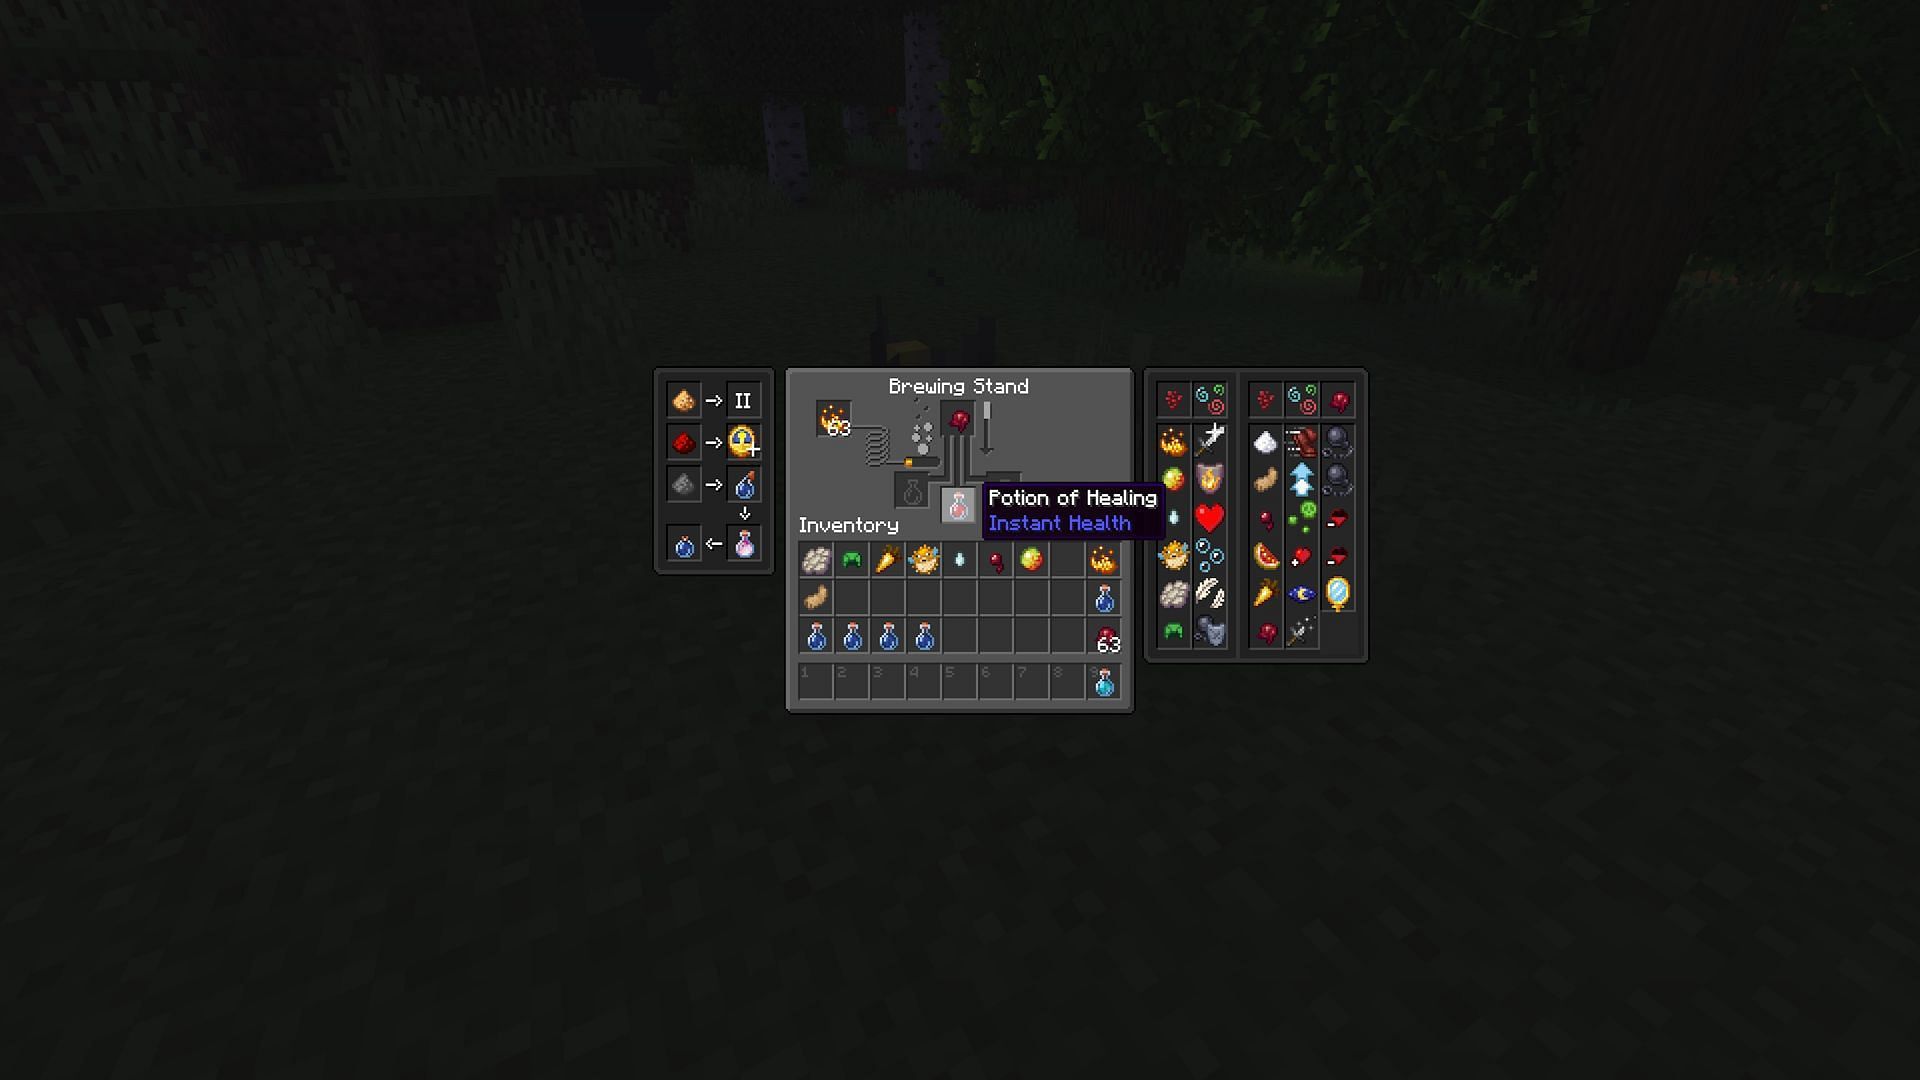 Potions of harming are the most lethal potion type (Image via Mojang)